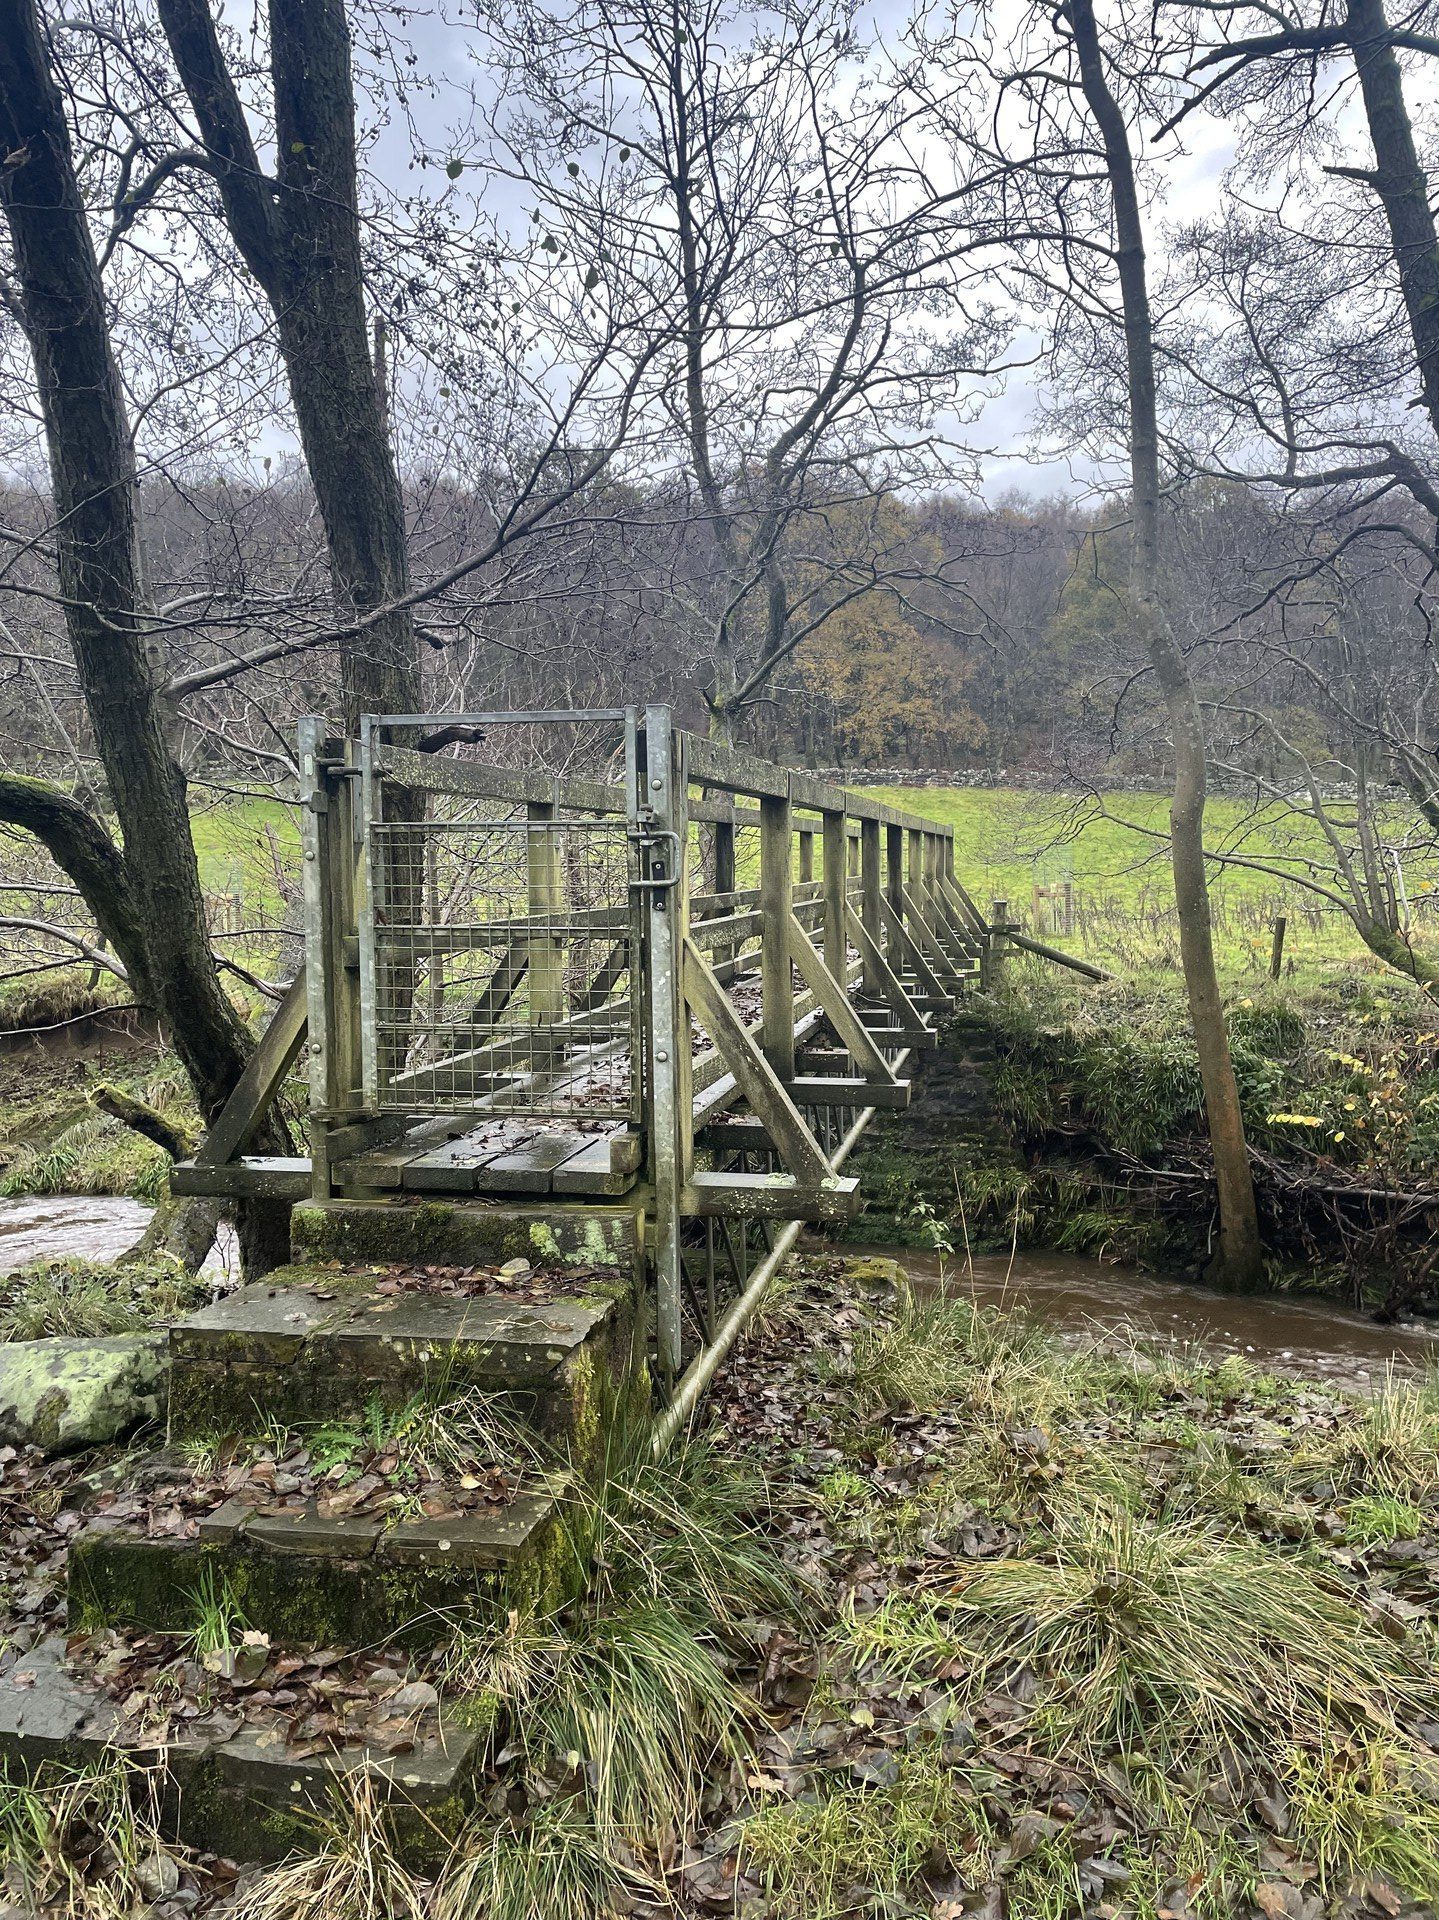 An old footbridge crossing the River Seph, clearly not well-used